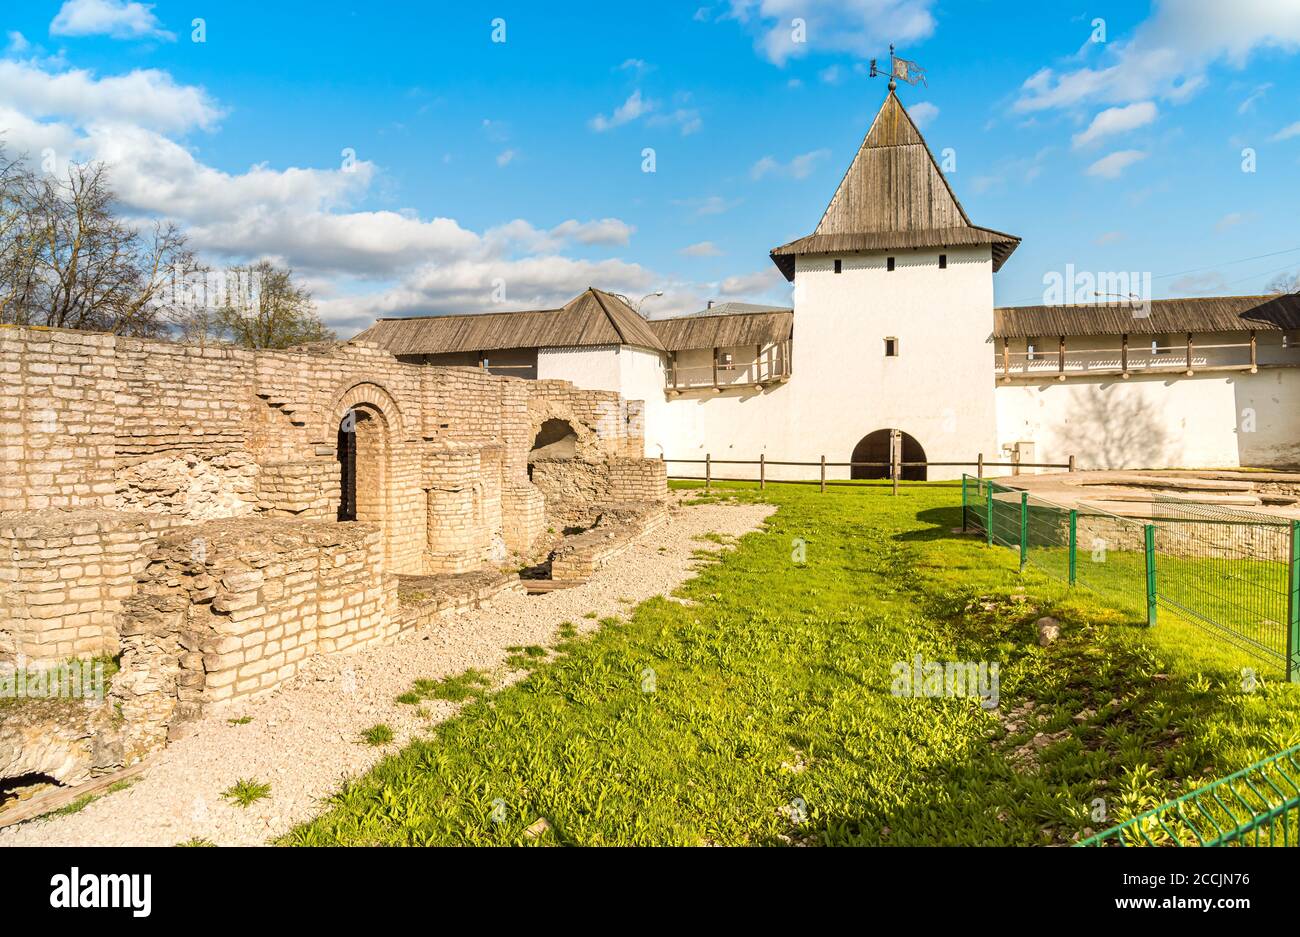 View of the Pskov Krom or Pskov Kremlin in the central part of the city, Russia Stock Photo